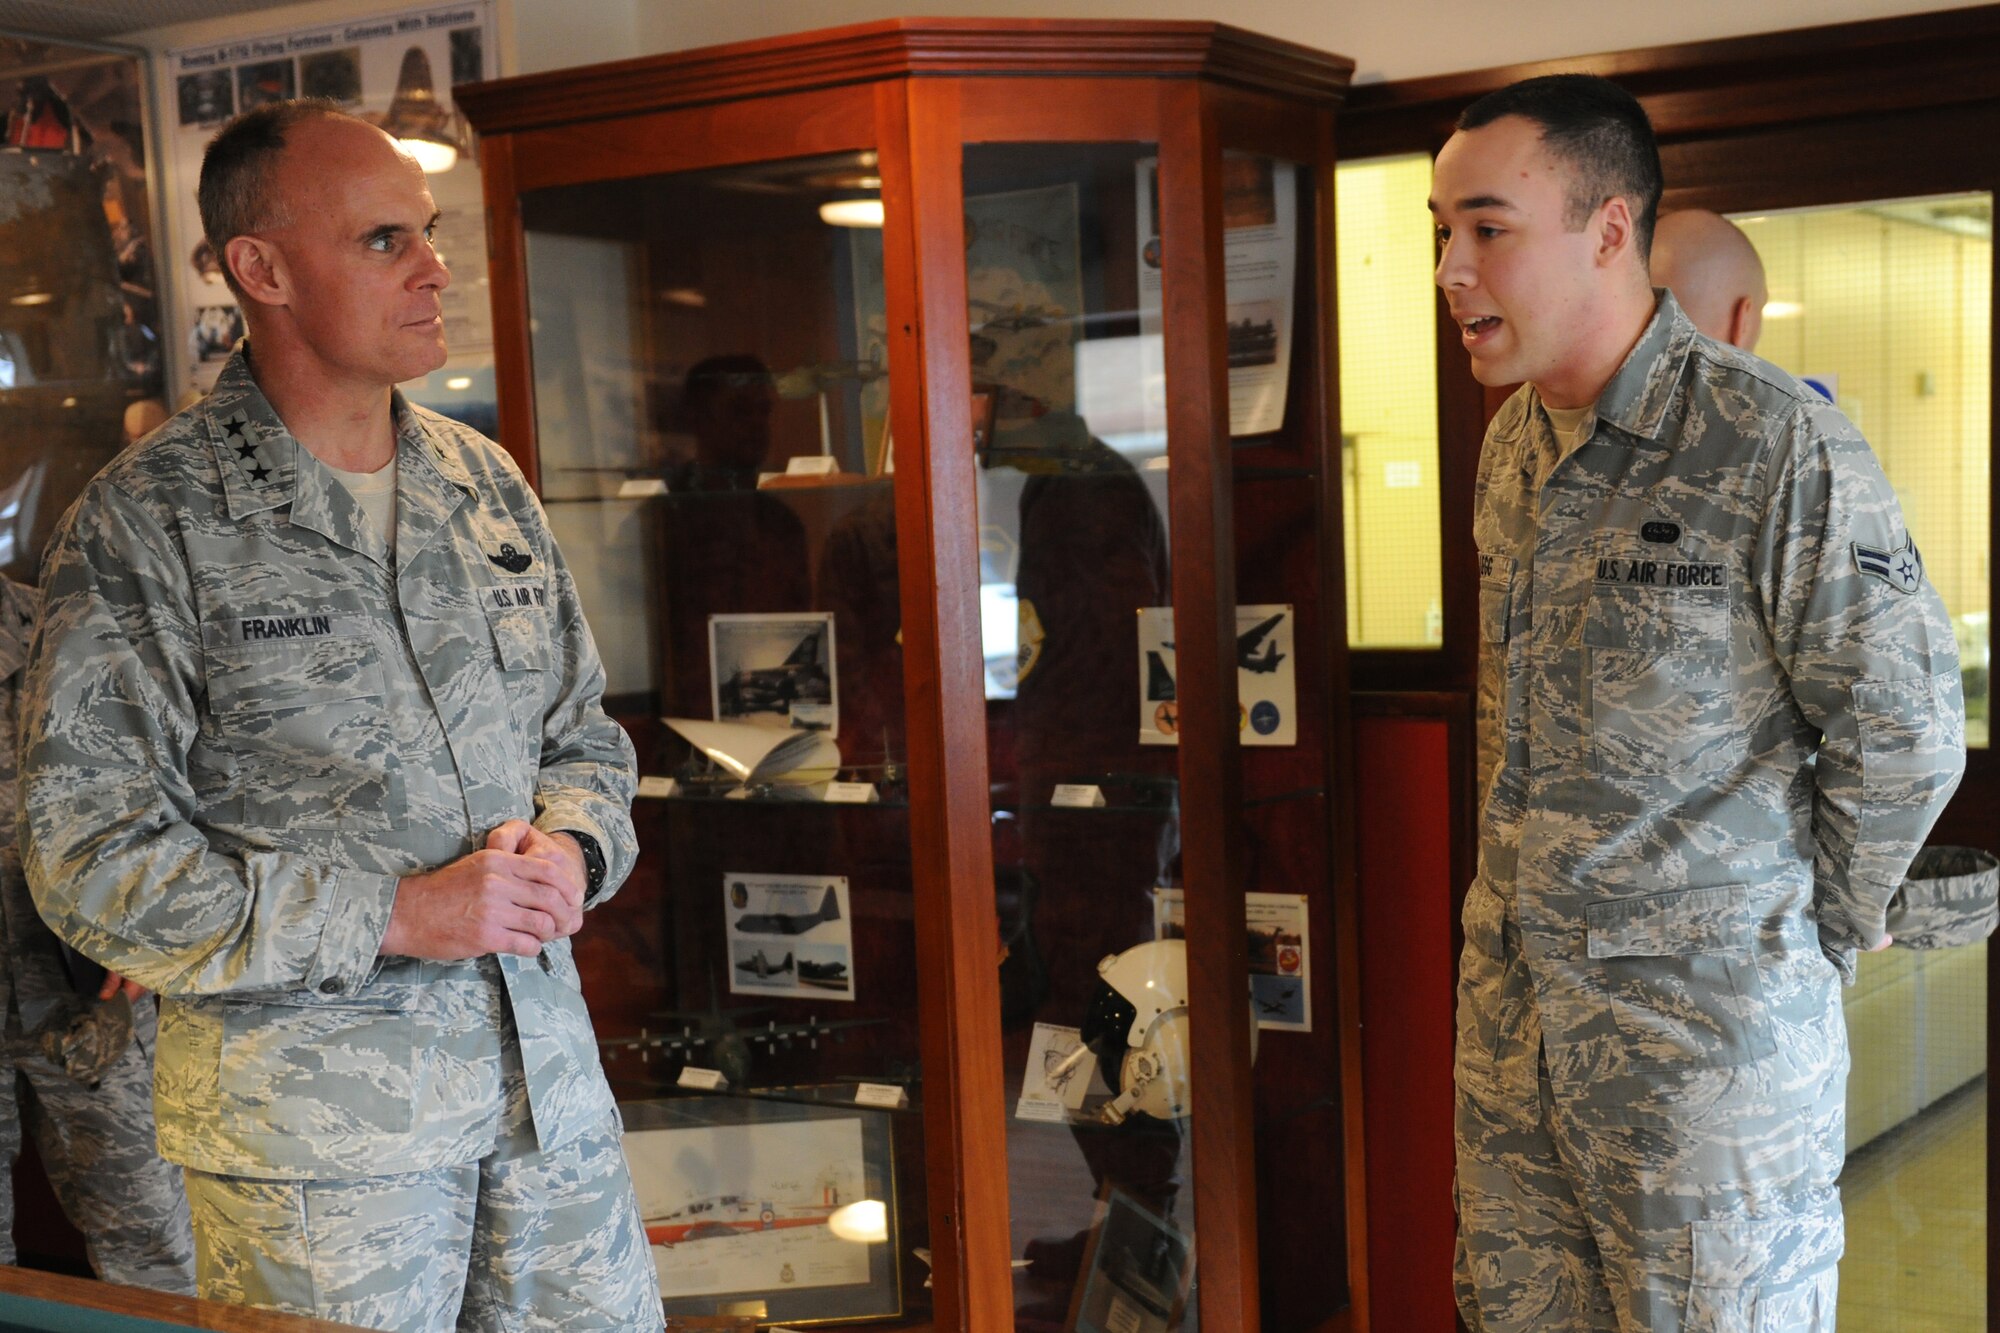 RAF ALCONBURY, England - Airman 1st Class Daniel Legg, 423rd Communications Squadron, shows Lt. Gen. Craig Franklin, 3rd Air Force commander, the day room at the RAF Alconbury Dormitory May 9. Legg told the general how important the day room was to unaccompanied junior enlisted personnel living in the dormitory. (U.S. Air Force photo by Senior Airman Joel Mease)